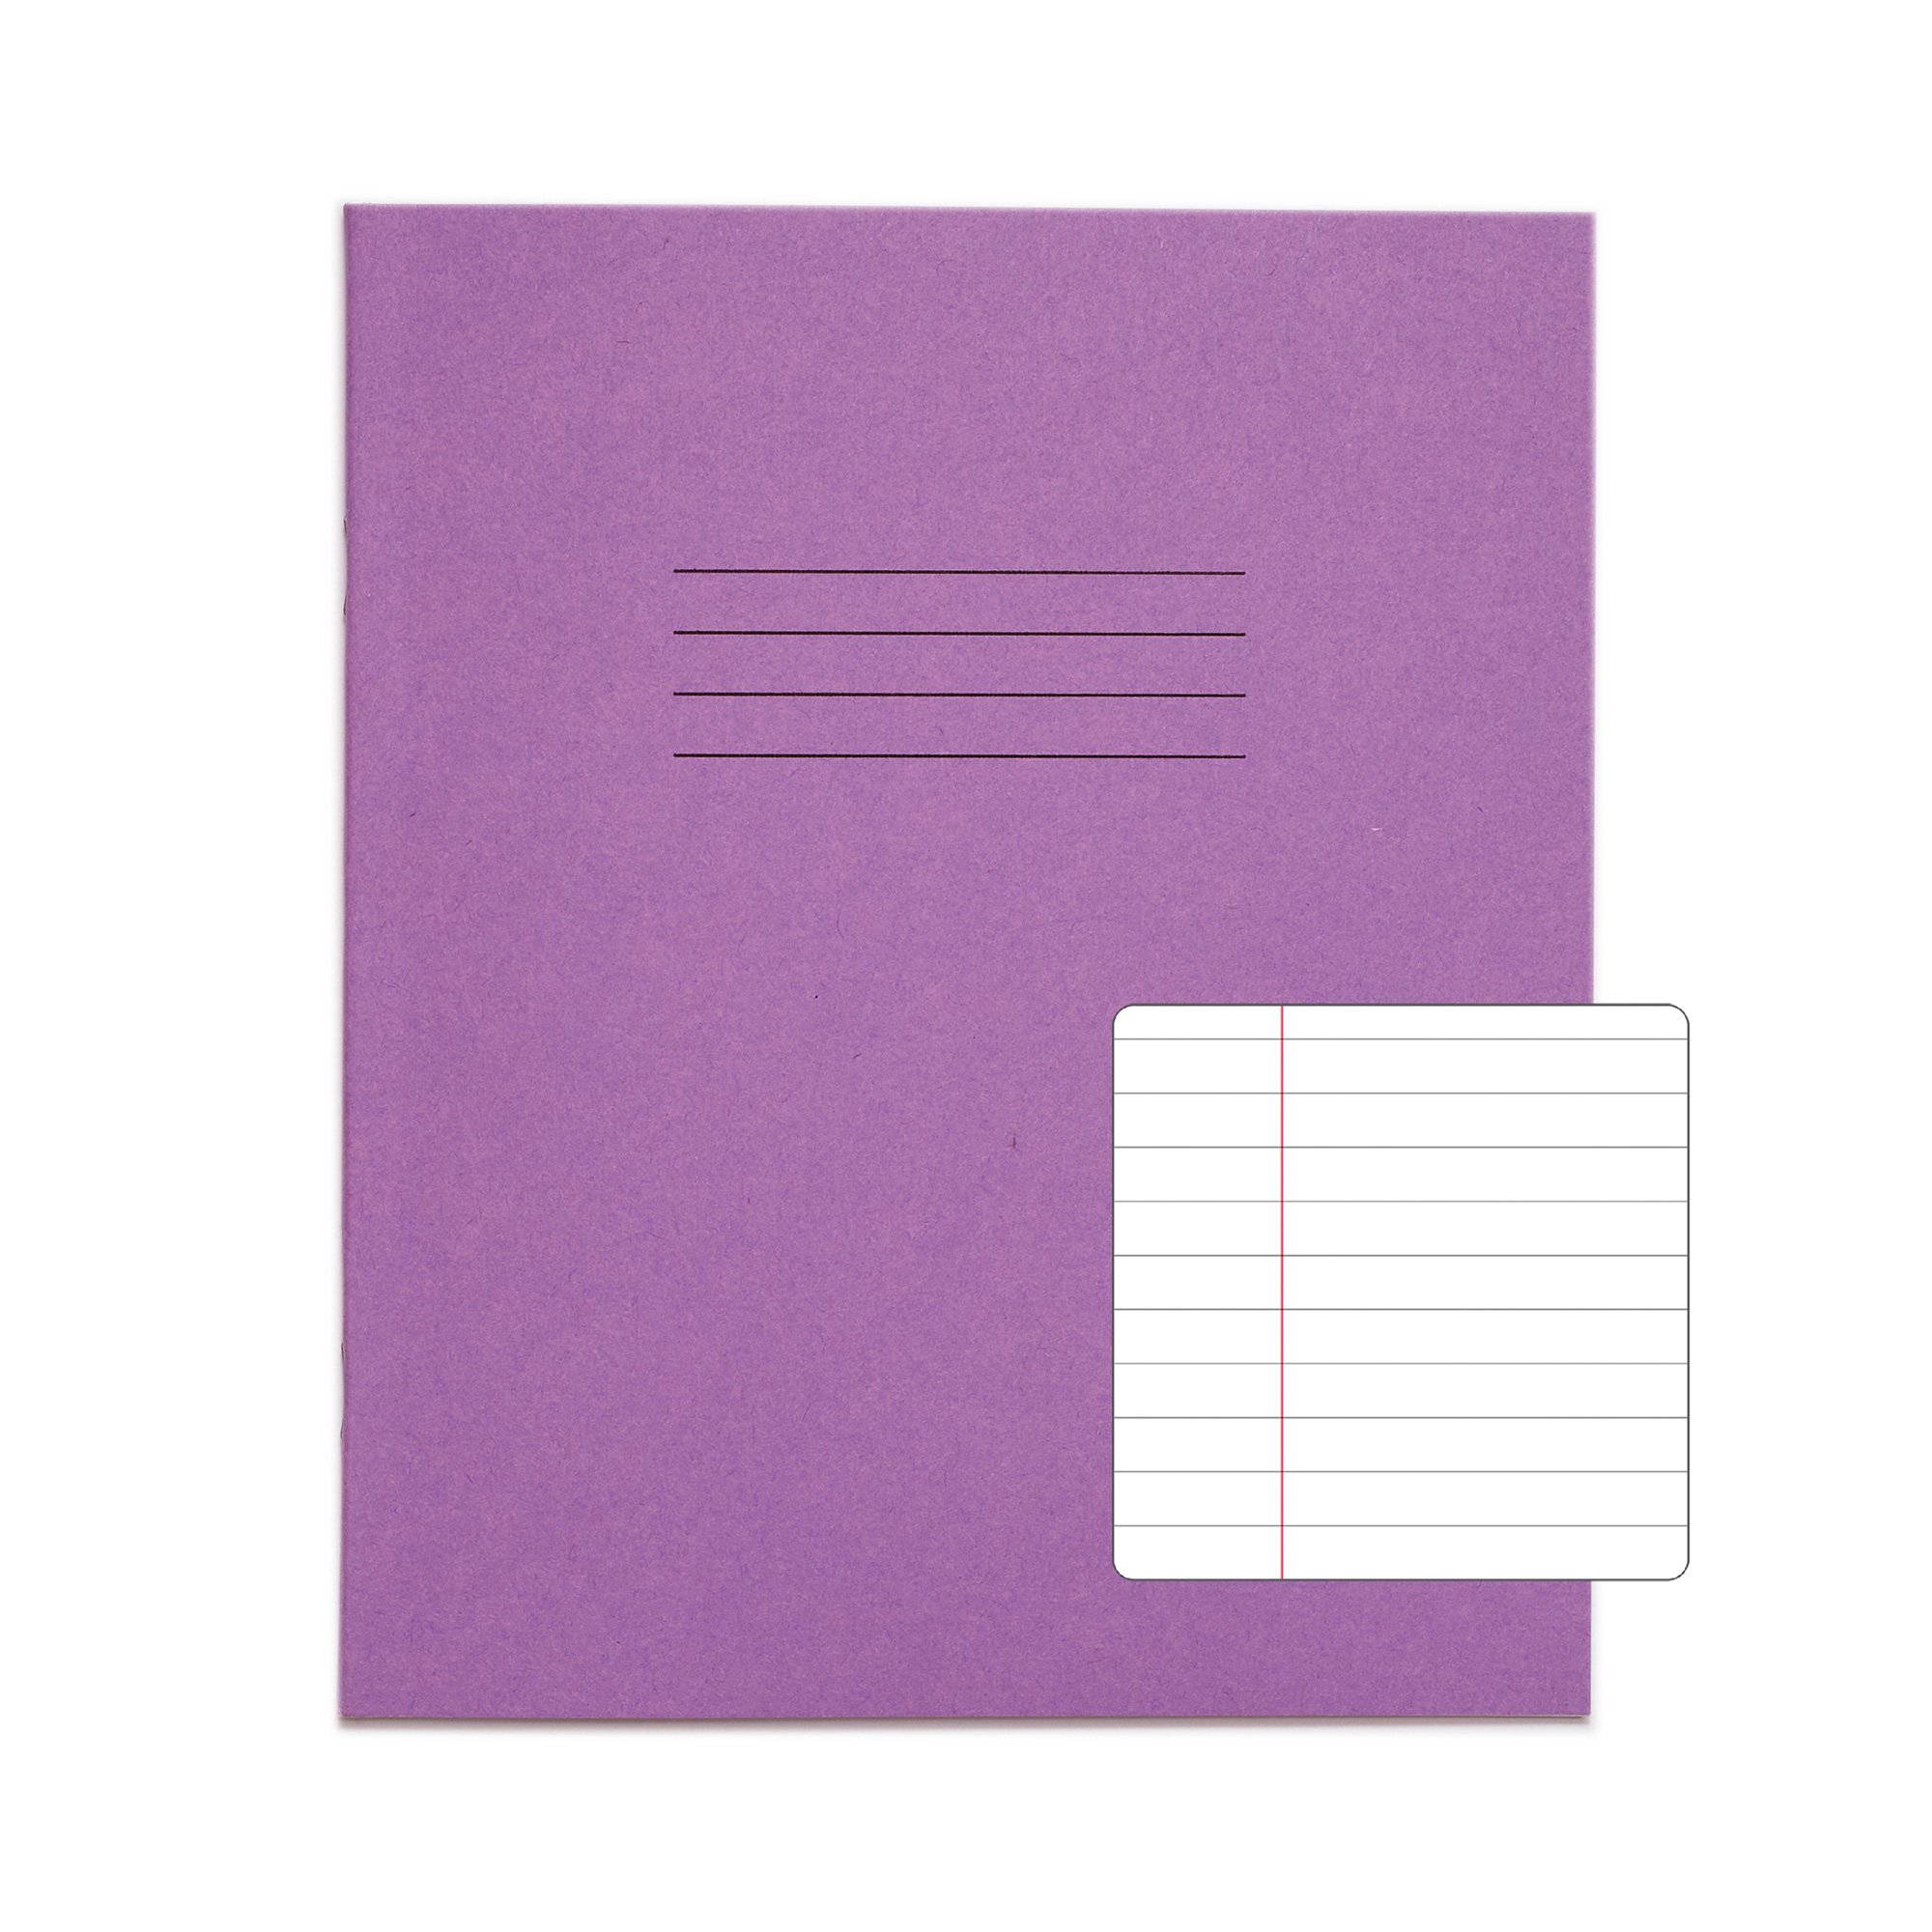 Rhino 8 X 6.5 Exercise Book 48 Page Ruled F8m Purple Pack 100 - VEX342-419-8